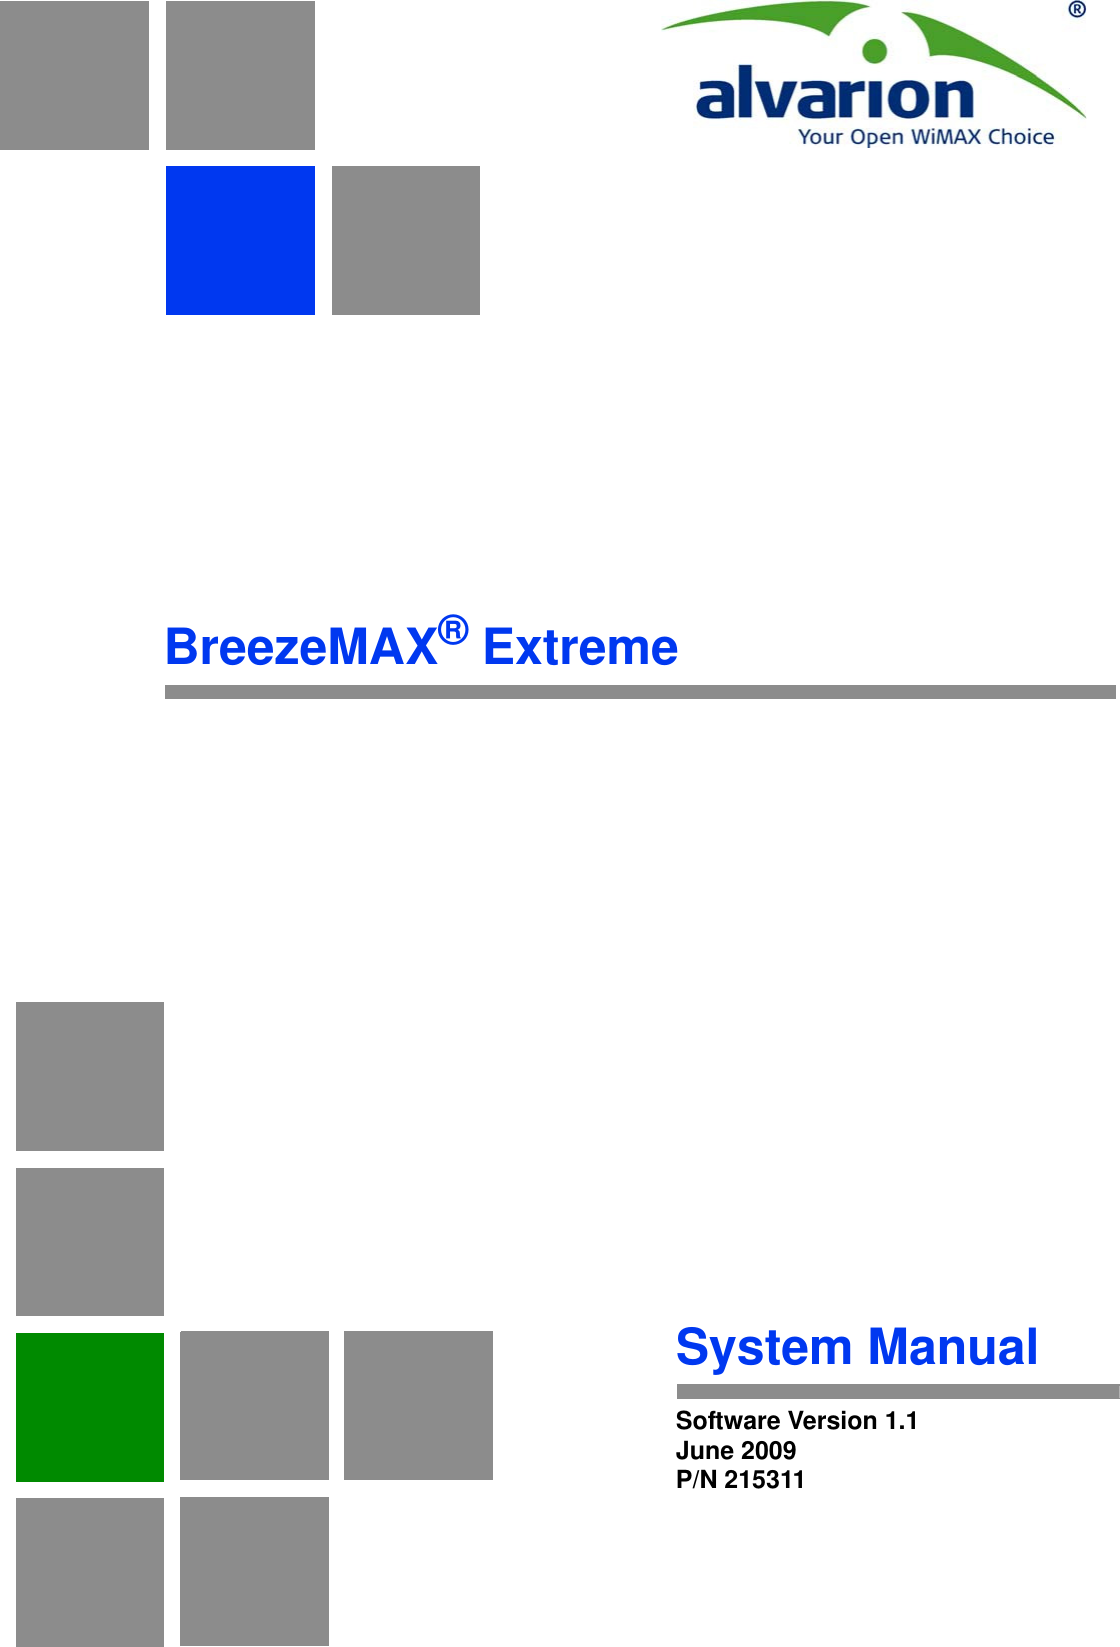 BreezeMAX® ExtremeSystem ManualSoftware Version 1.1June 2009P/N 215311